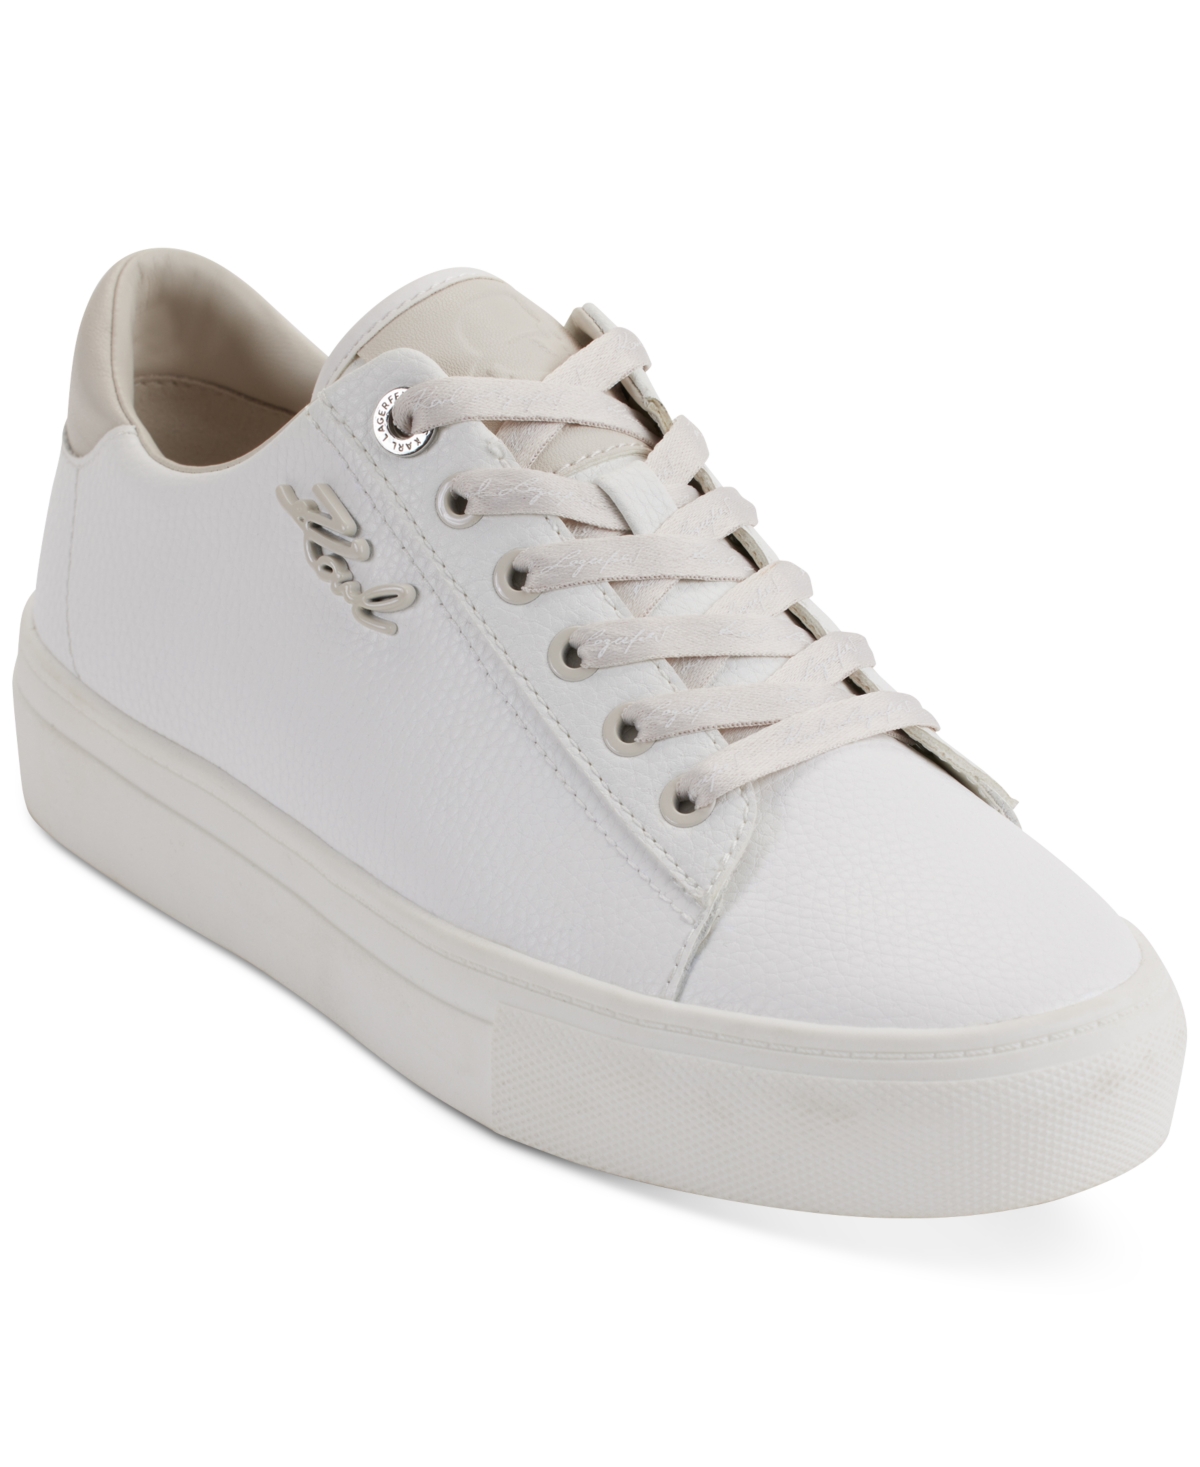 Women's Carson Lace-Up Sneakers - Bright White/ Black